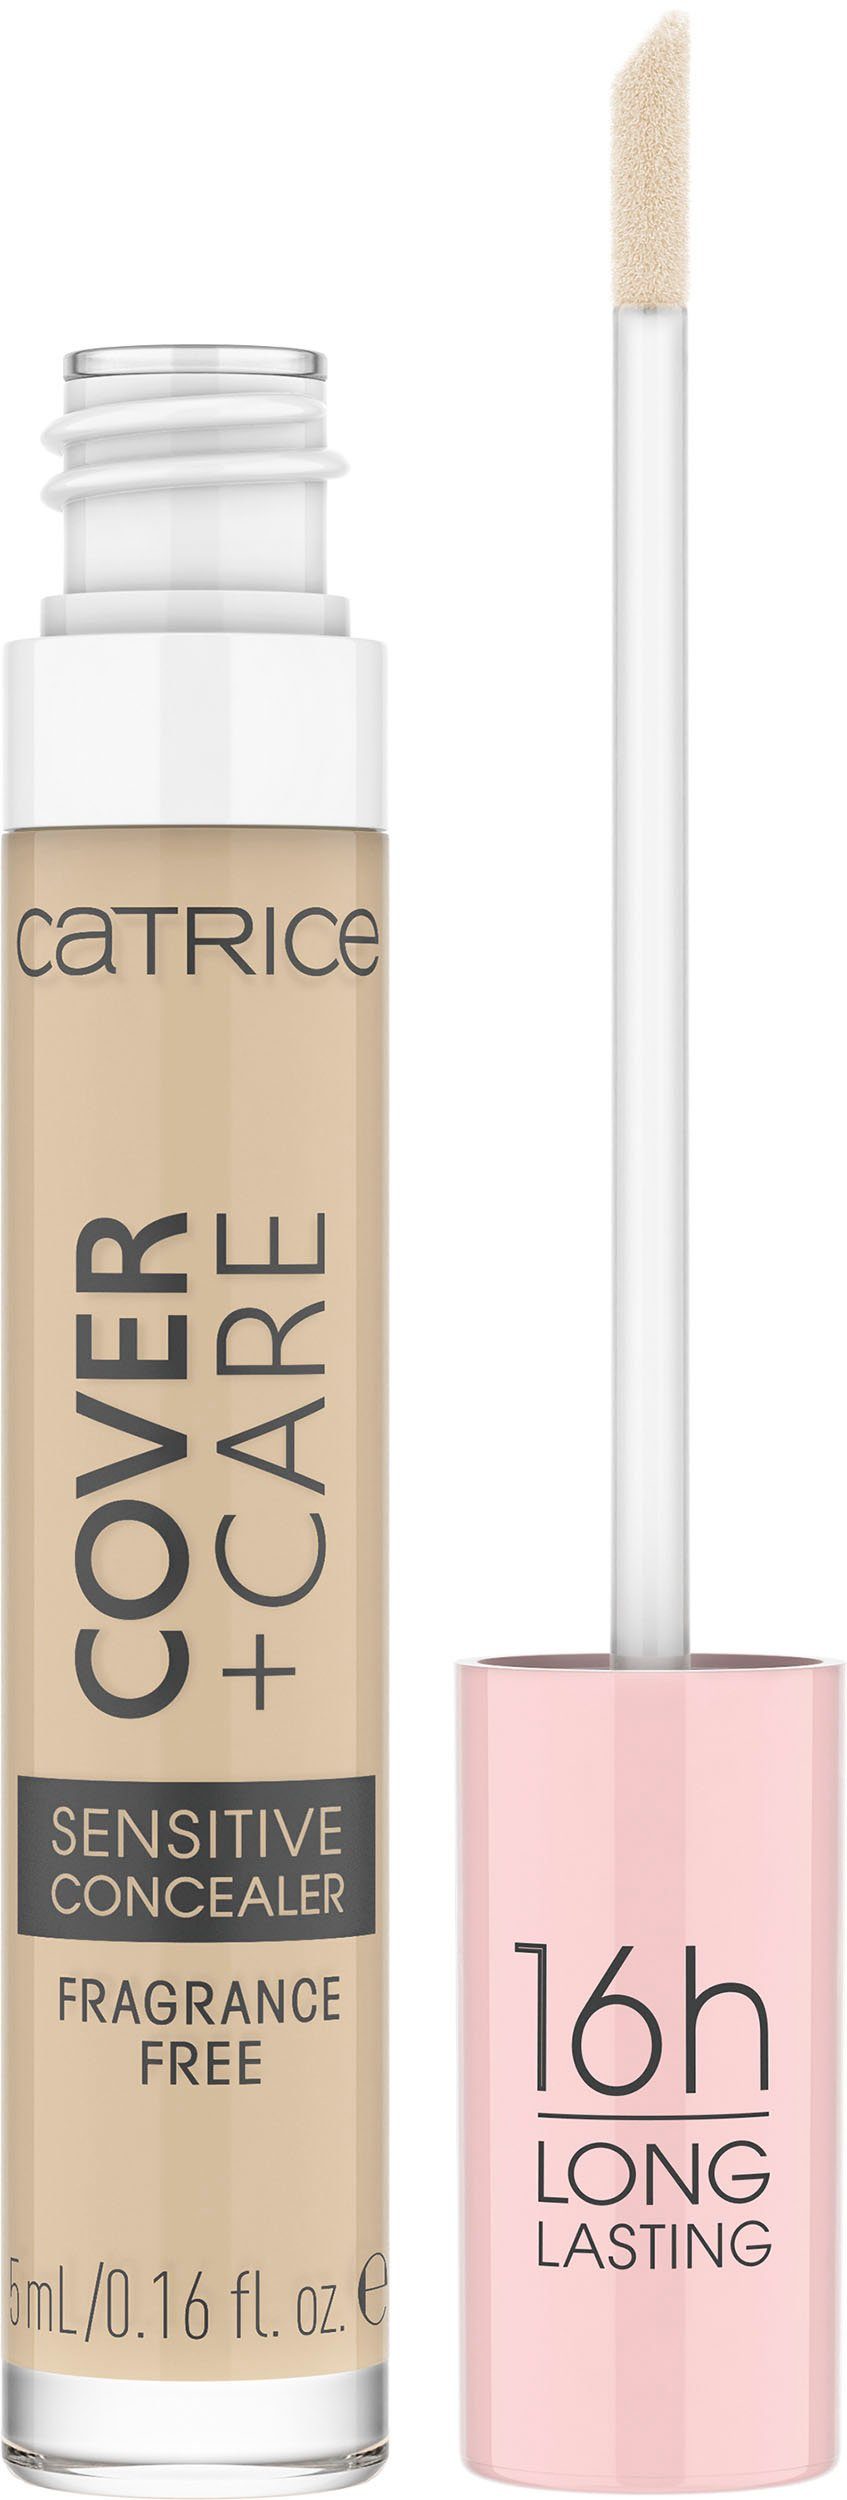 Catrice Concealer Catrice Cover + nude Care Sensitive Concealer, 3-tlg. 002N